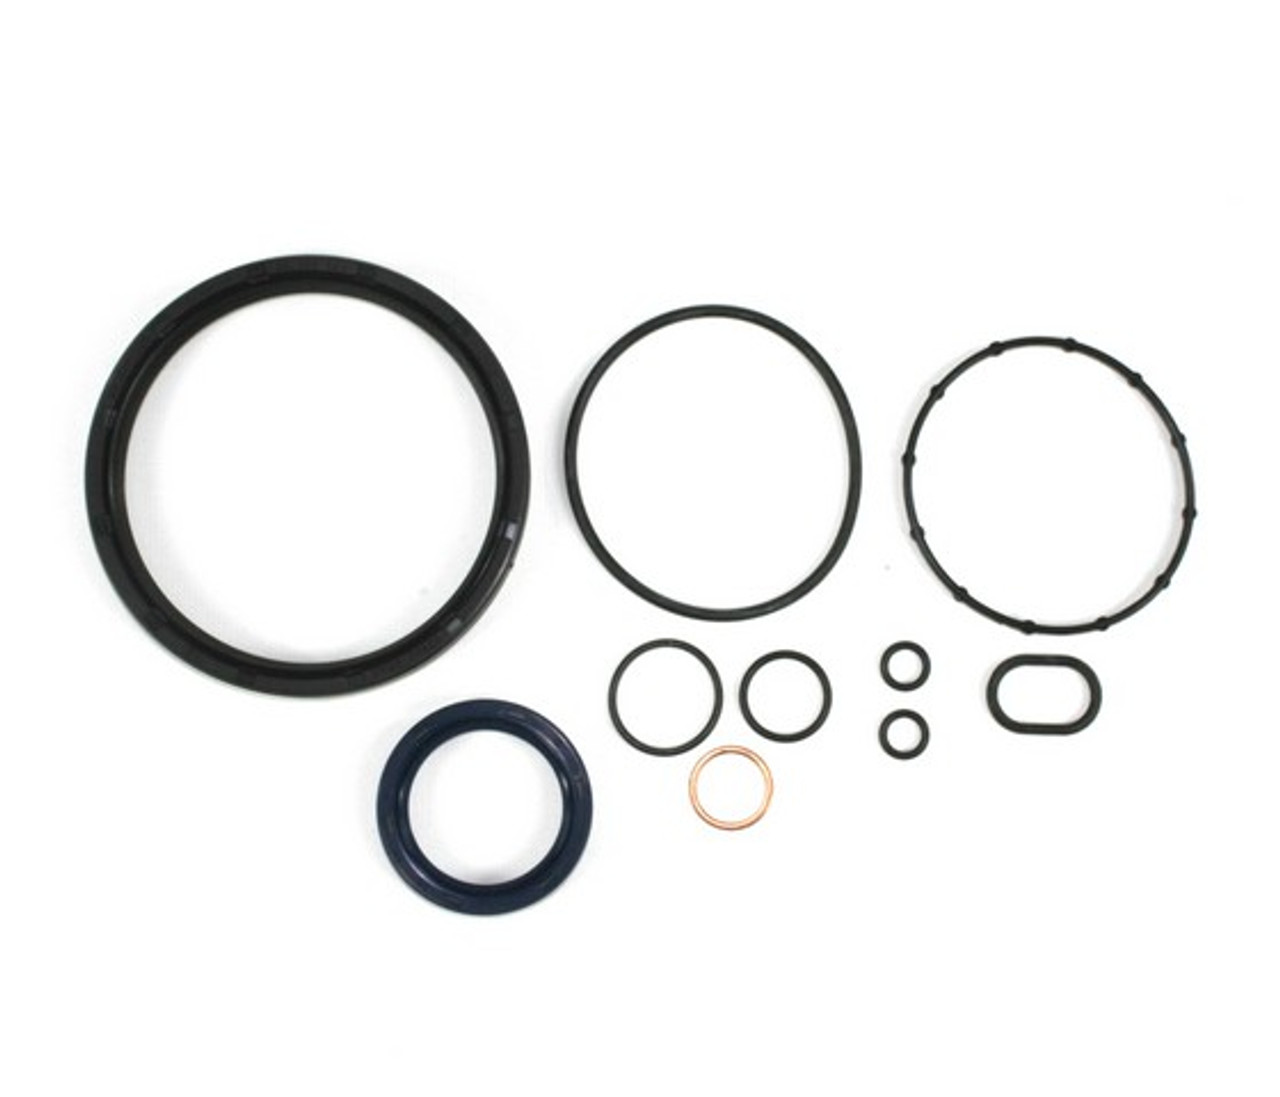 Lower Gasket Set 3.2L 2003 Cadillac CTS - LGS3120.1